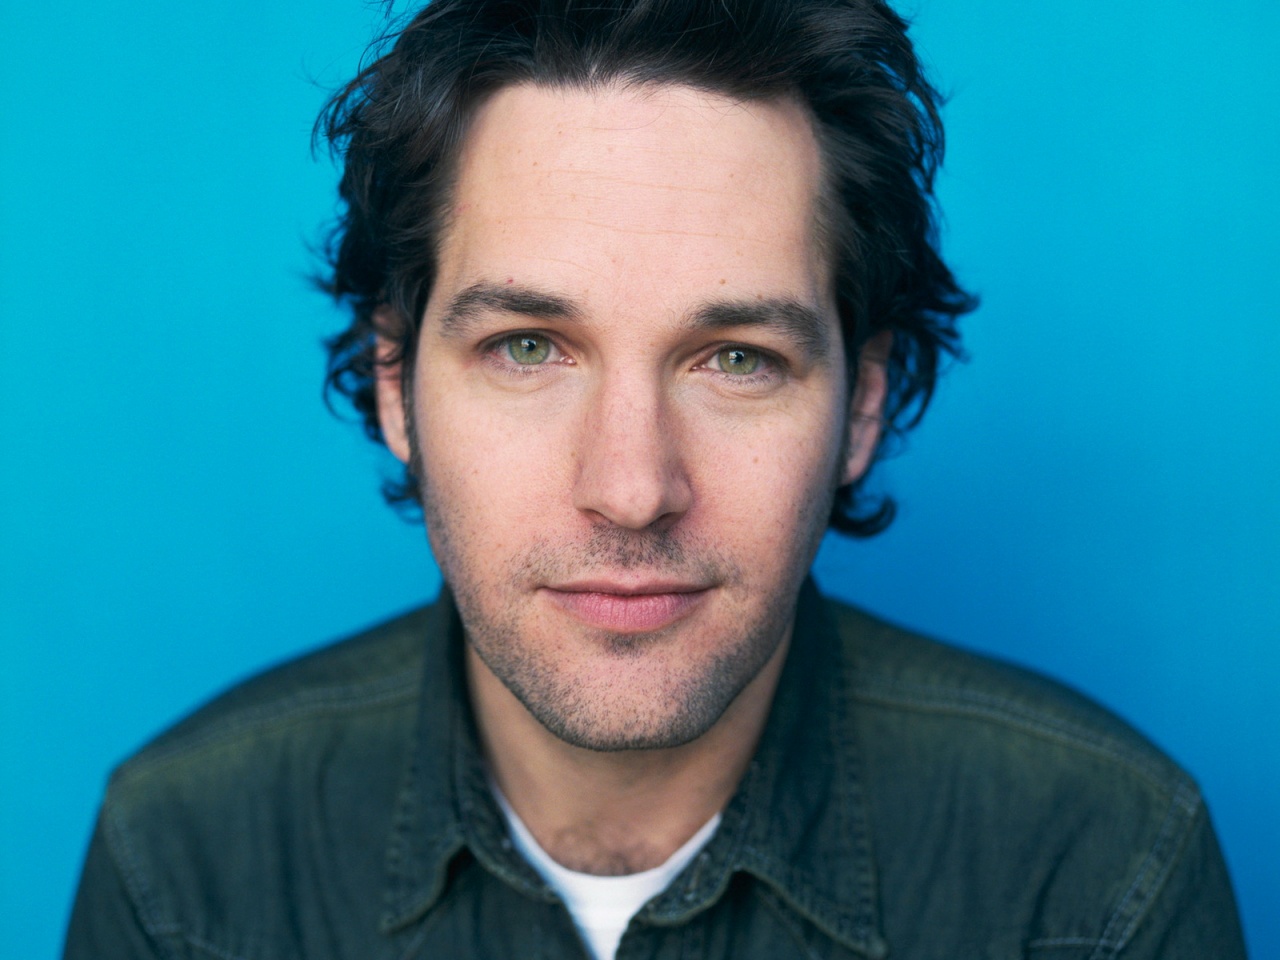 Poll: What is your favorite film starring or featuring Paul Rudd?